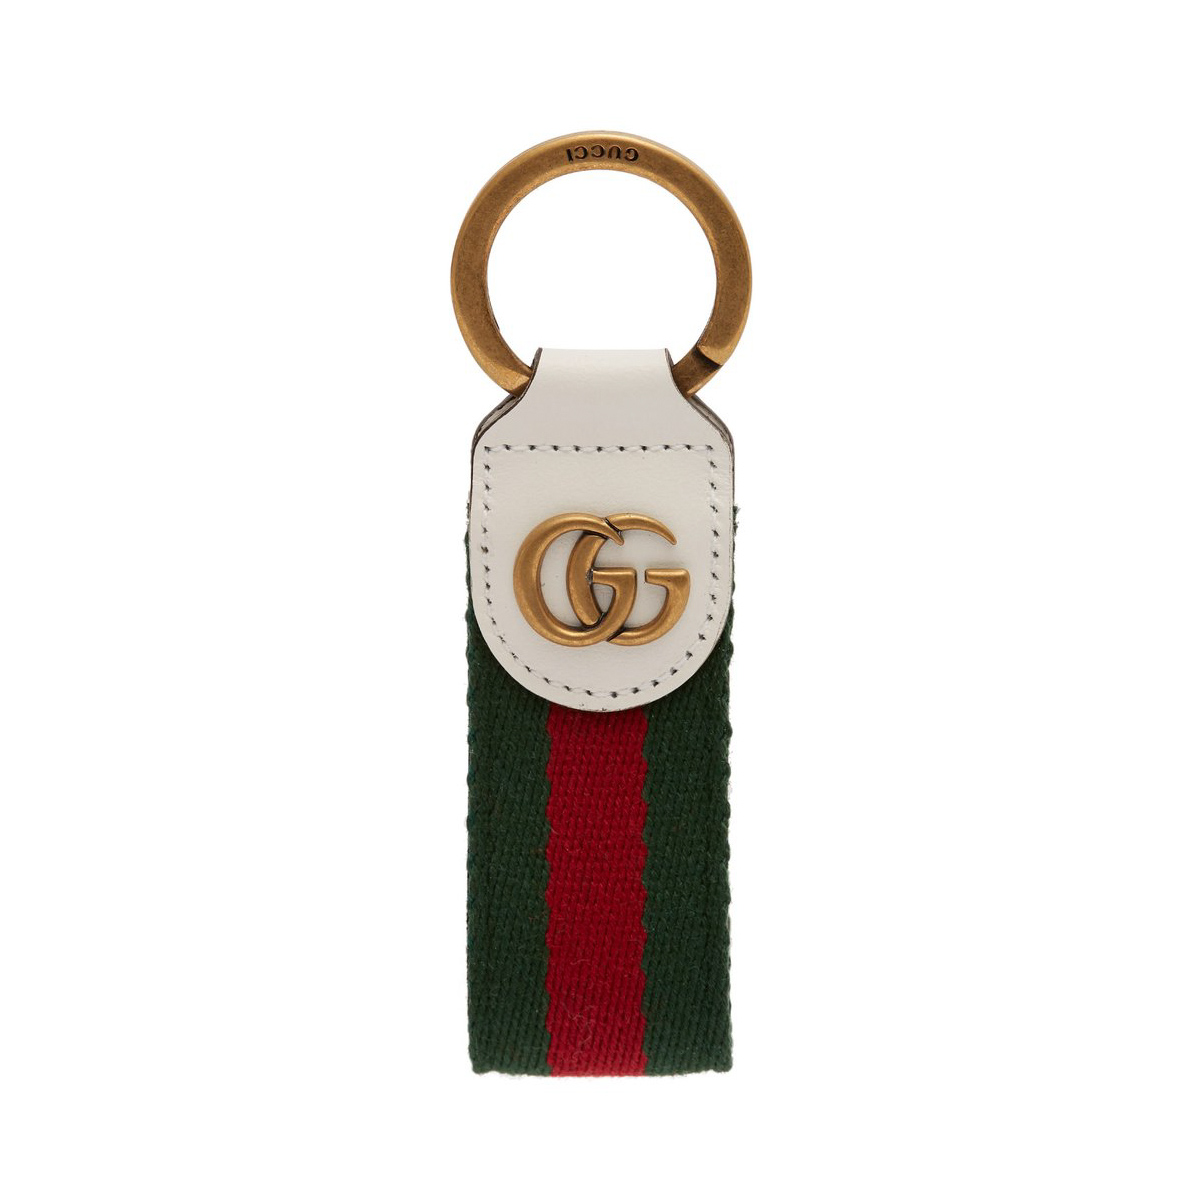 the cheapest gucci item